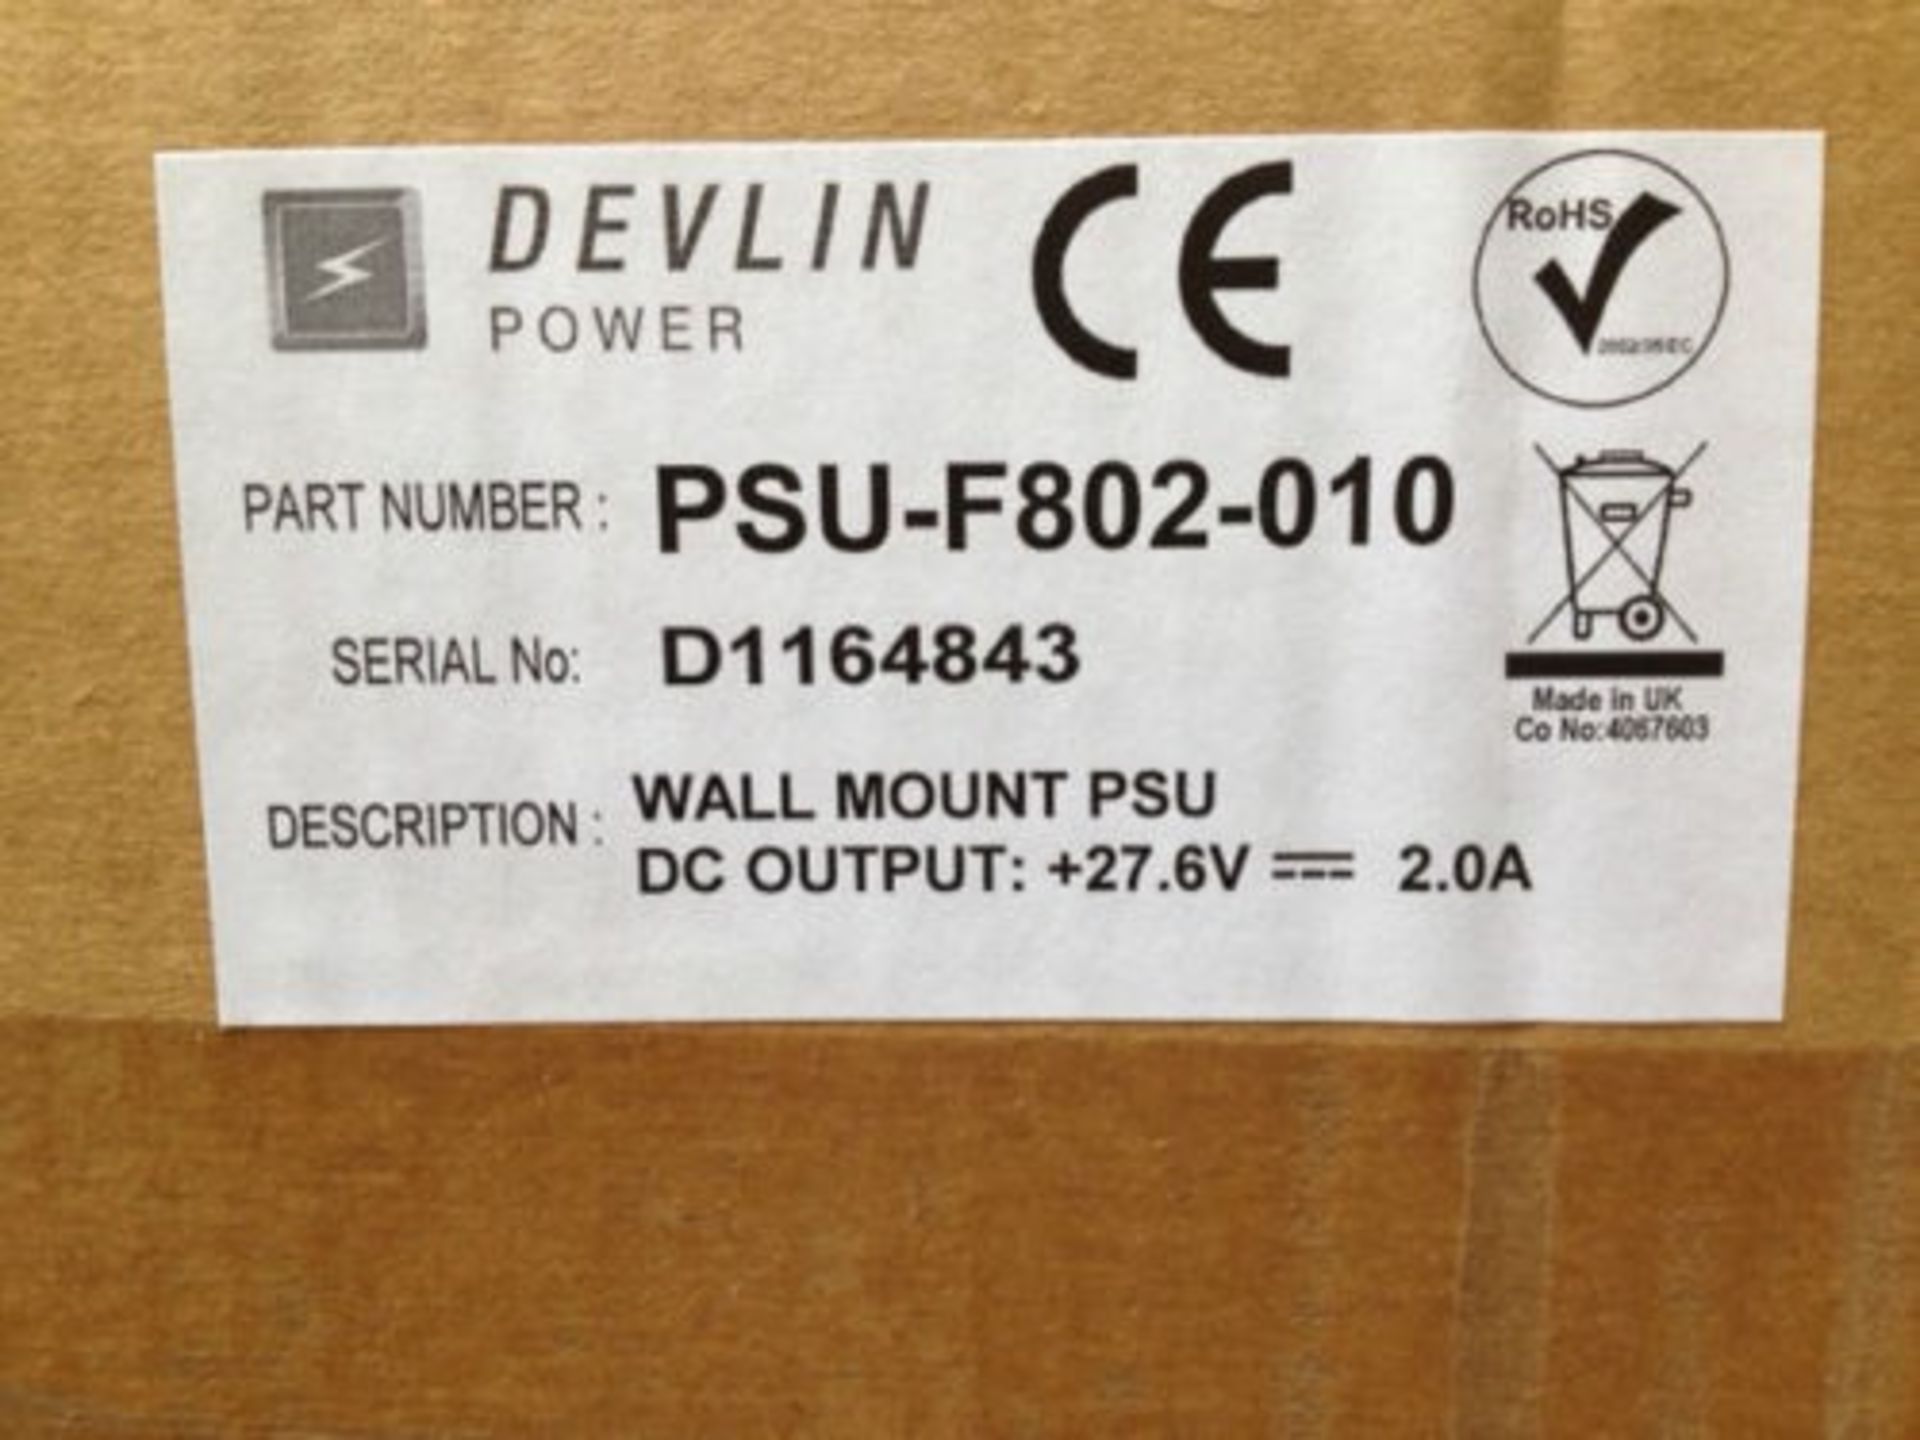 10 x Devlin F Series Battery Back Wall Mount PSU 2A Battery Back Up - Boxed - 6600662 - Image 3 of 3